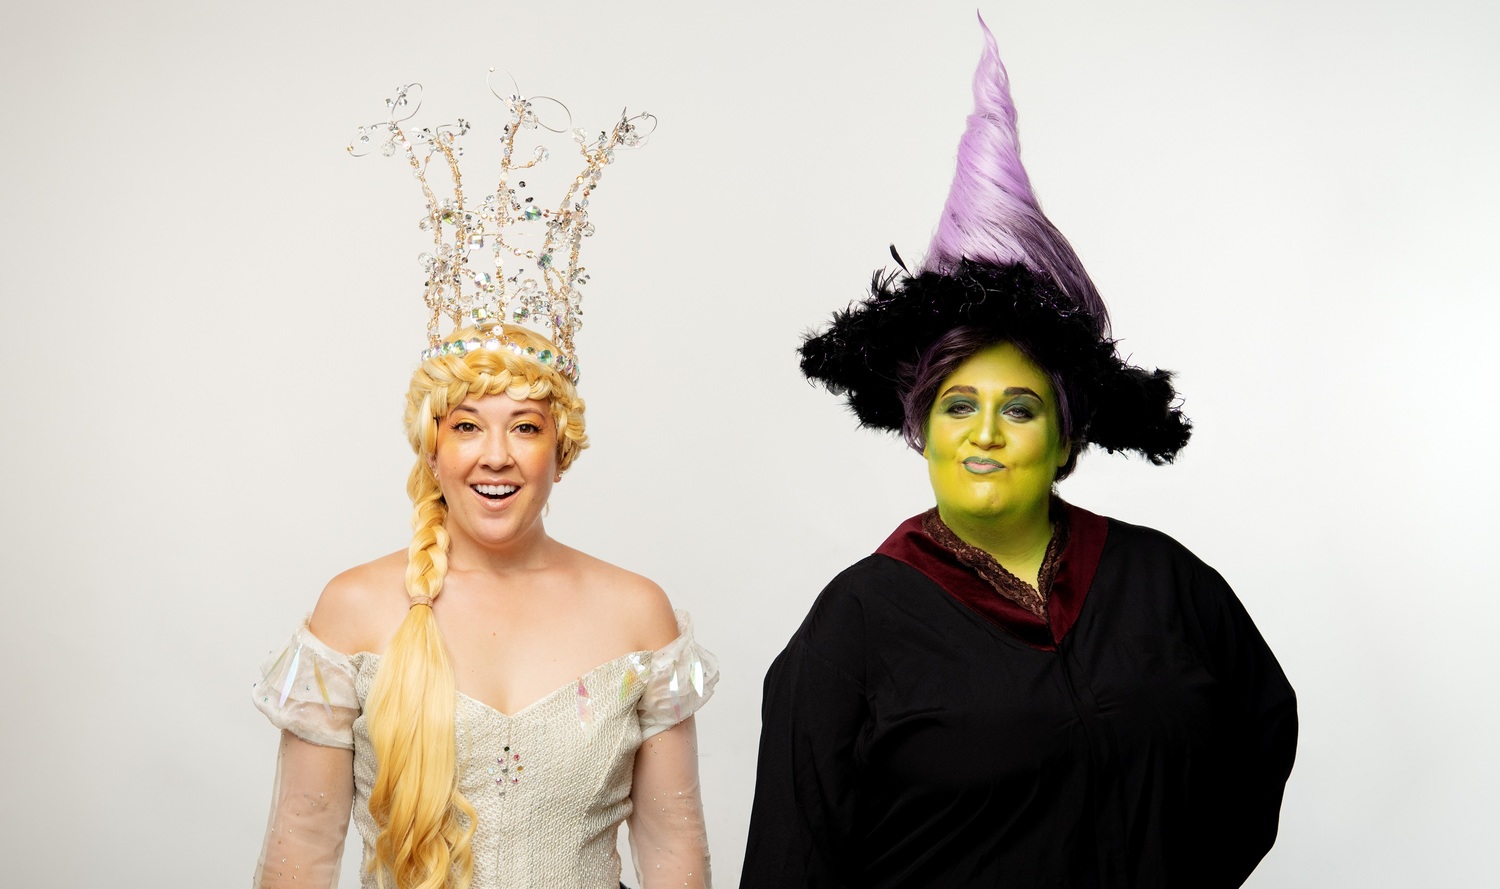 Glinda (MEGAN MCGRATH) and Wicked Witch of the West (BRIEL POMERANTZ) pose together in Berkeley Playhouse's production of The Wizard of Oz, directed by Lexie Lazear. Performing at the Julia Morgan Theater from November 9 to December 23